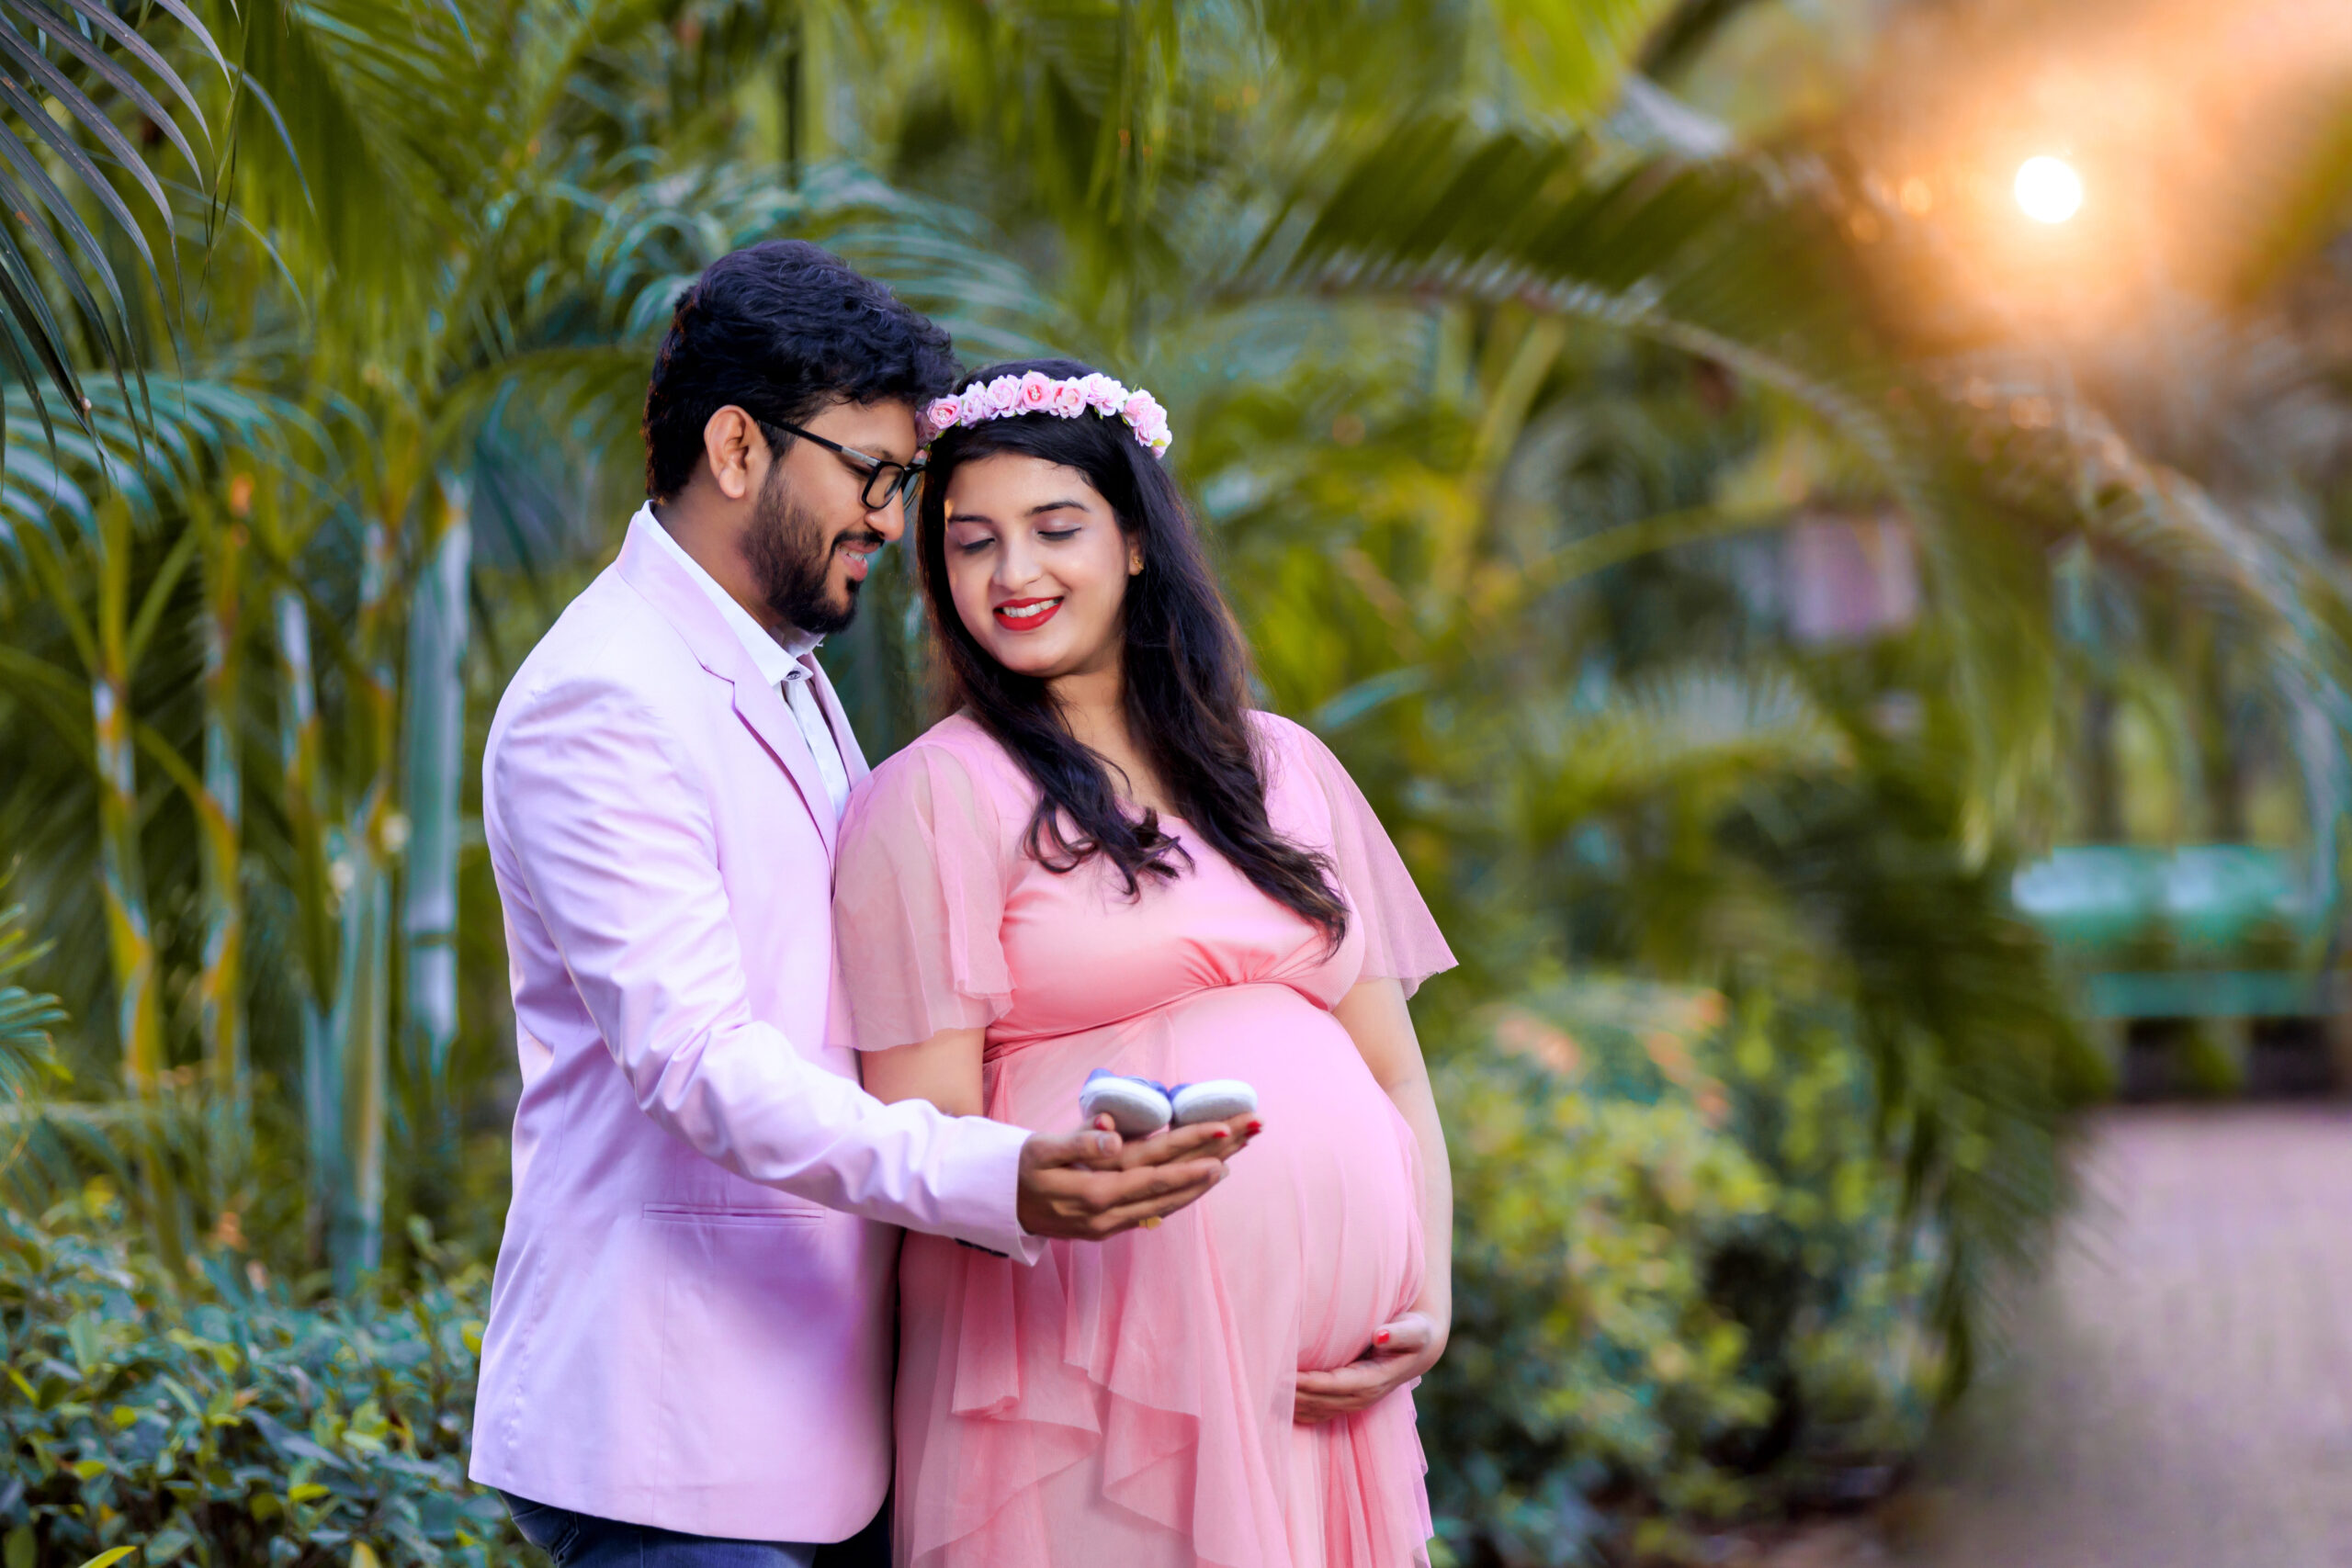 Maternity photographers in Chennai, Seemantham — Incognito frames